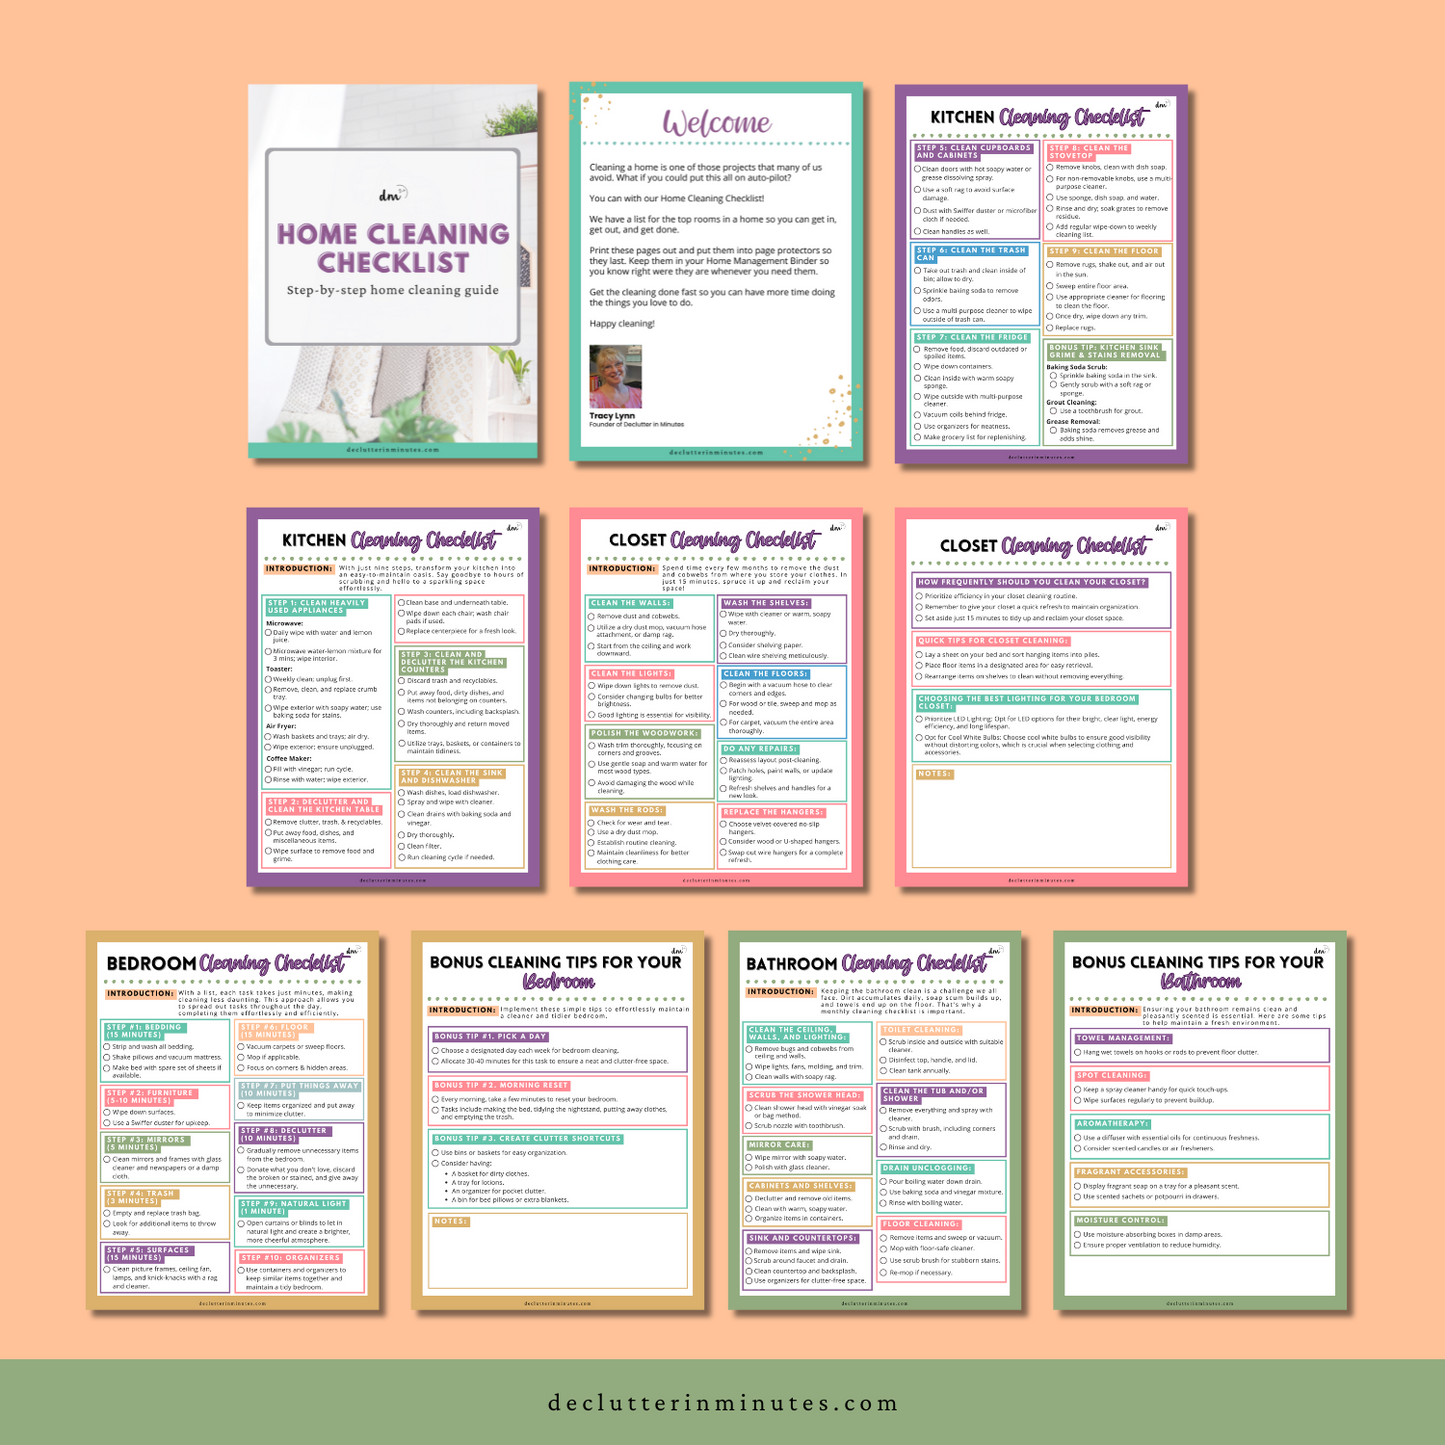 Home Cleaning Checklist Bundle